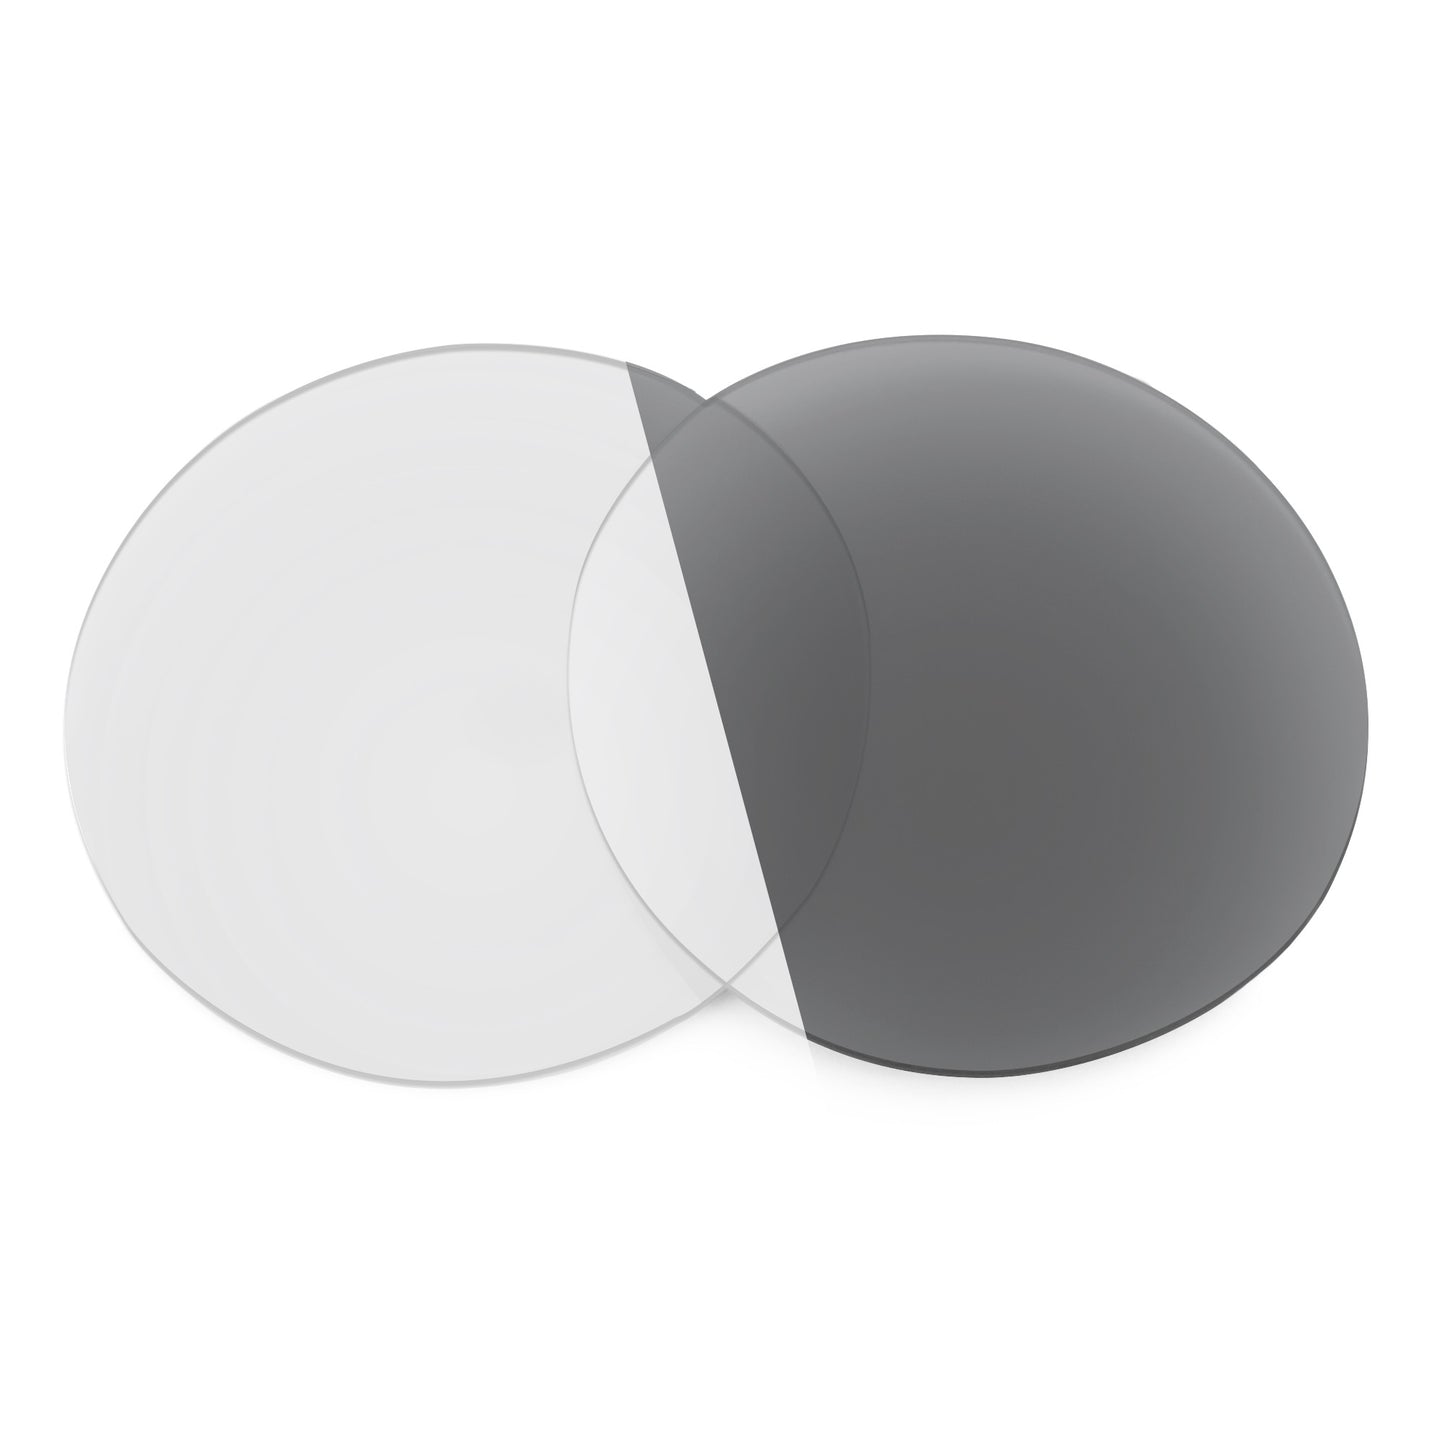 Revant replacement lenses for Arnette Blowout AN4142 Non-Polarized Adapt Gray Photochromic